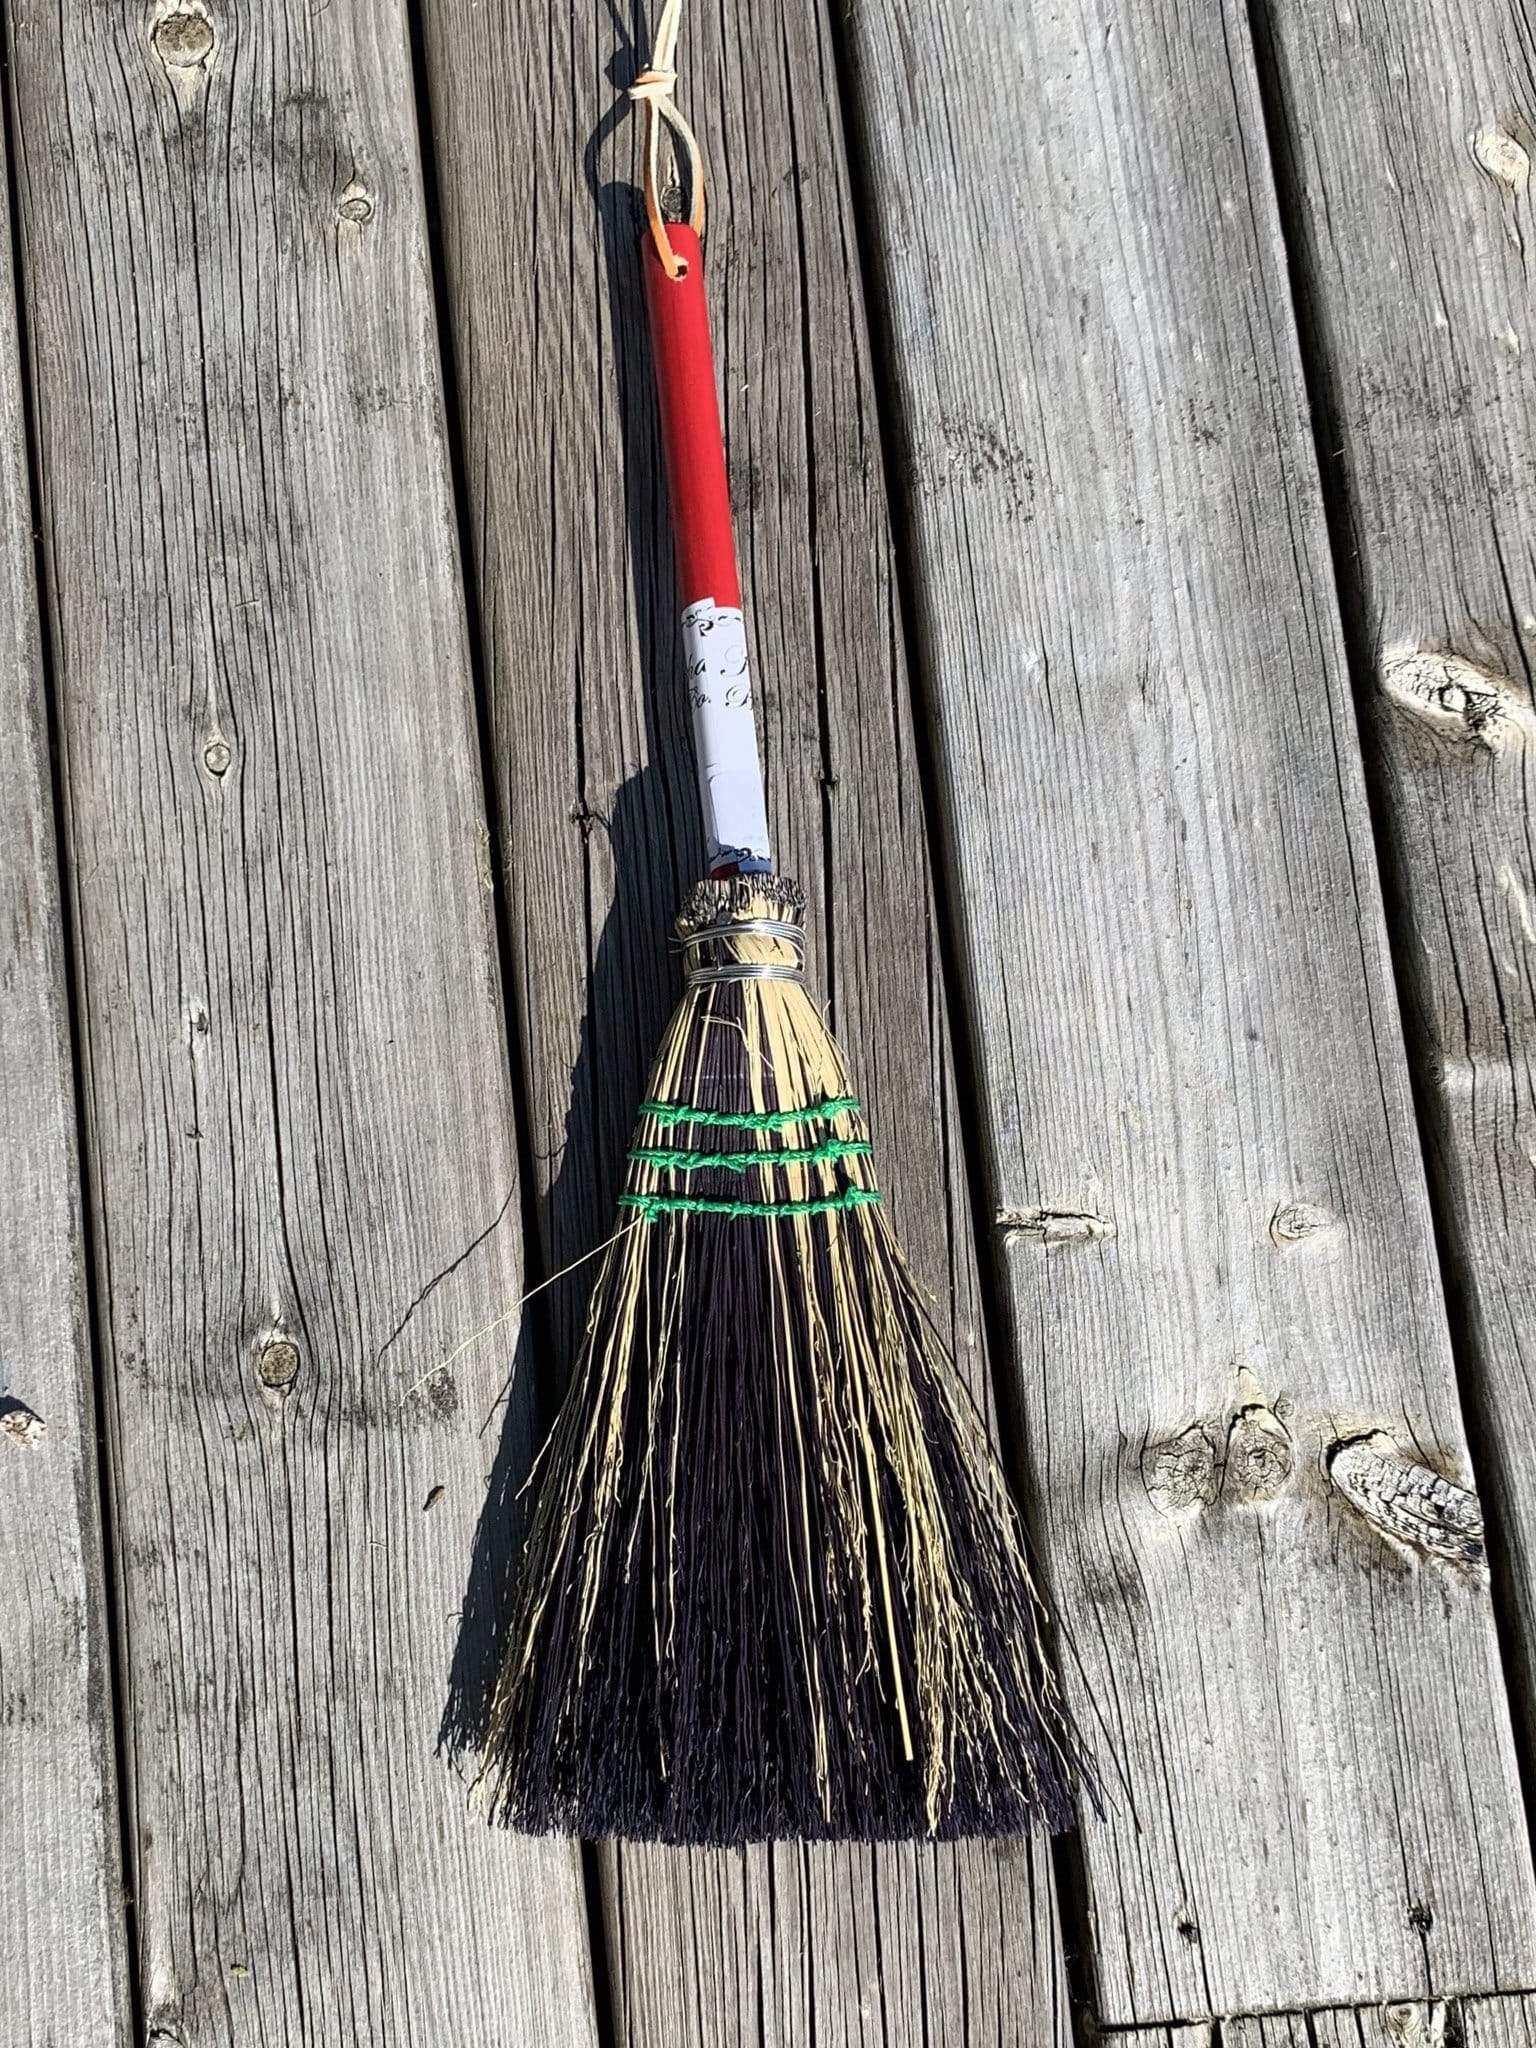 Whisk broom with handle and splash of black